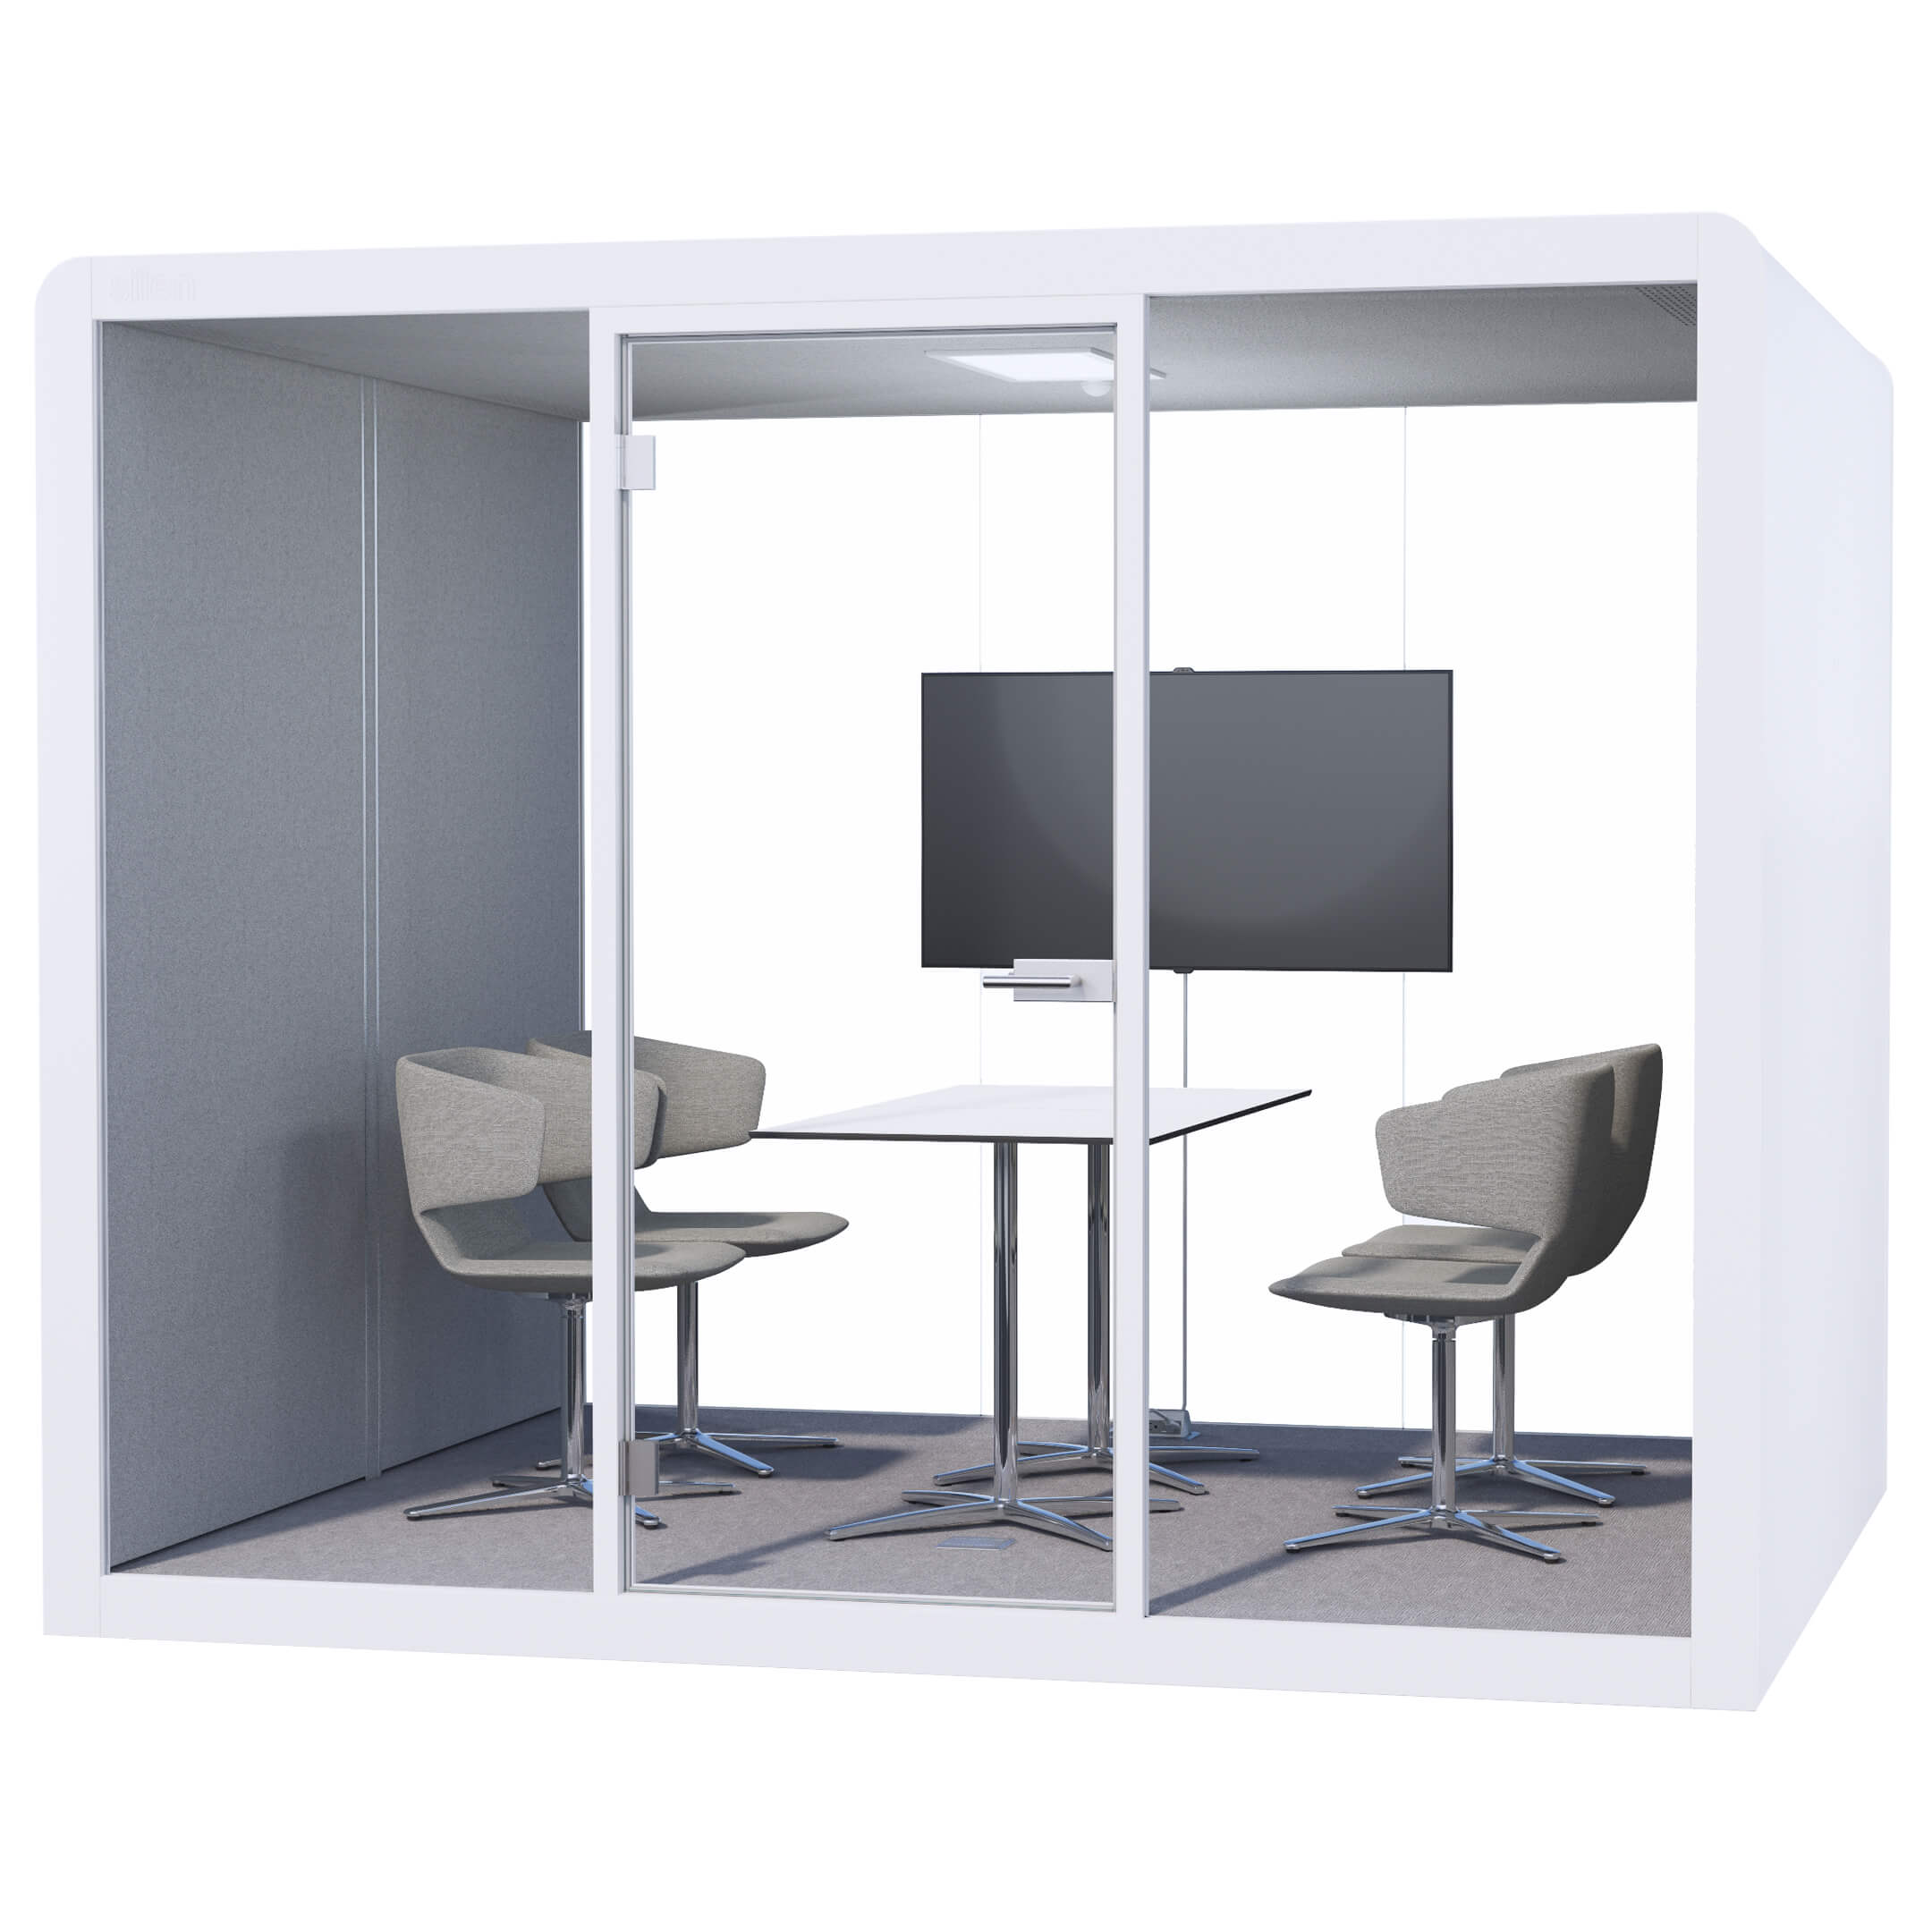 LIGHT GREY SPACE MAX - VIDEO CONFERENCING SETUP